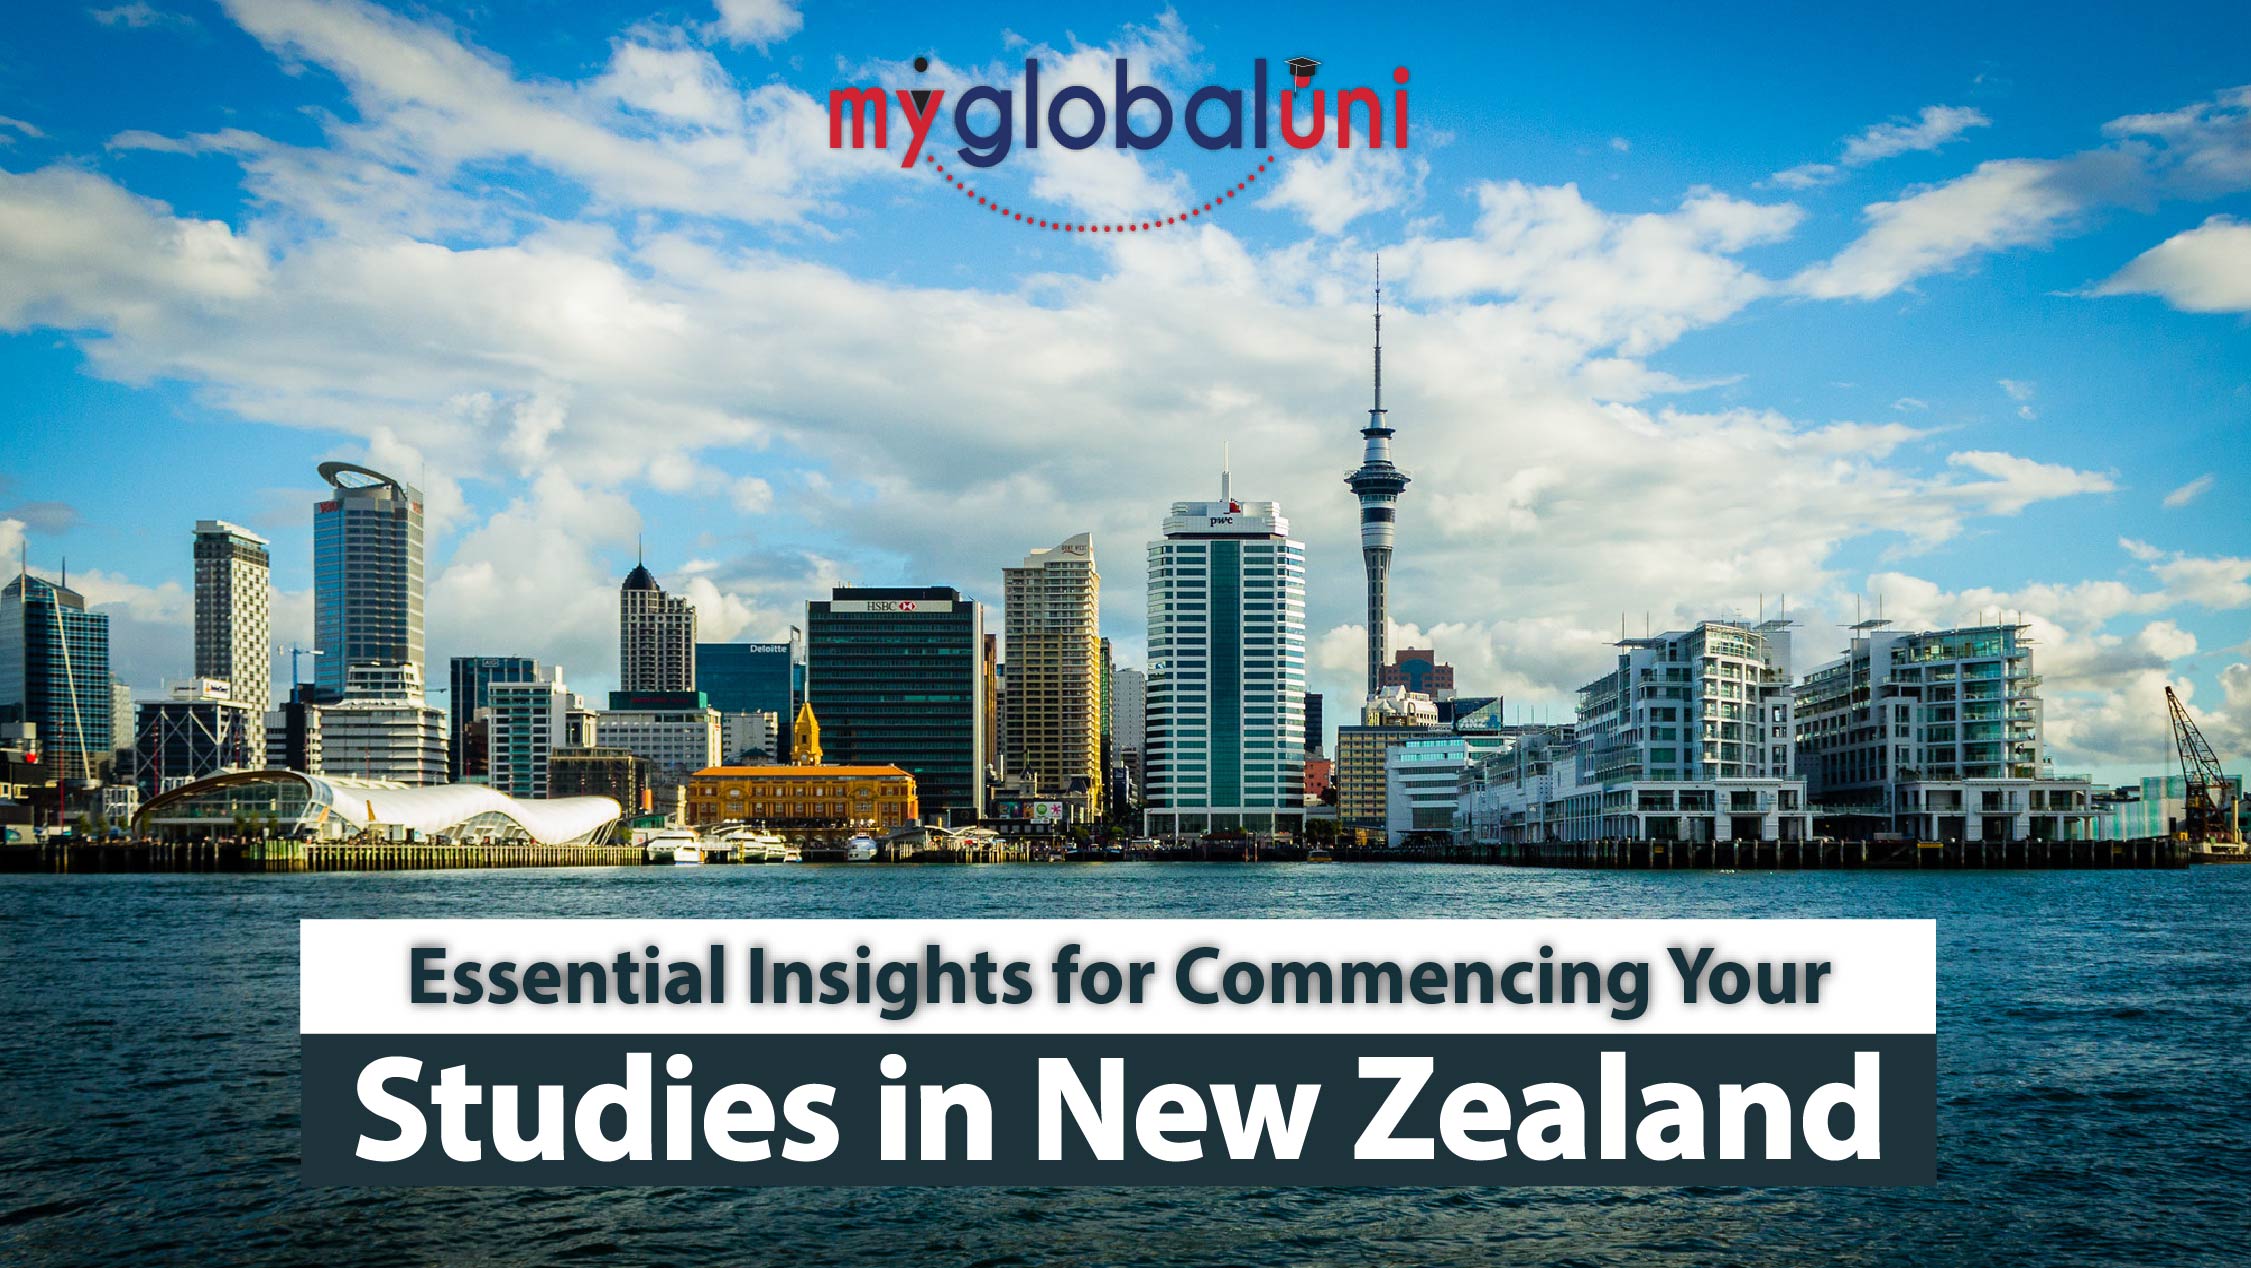 Essential Insights for Commencing Your Studies in New Zealand